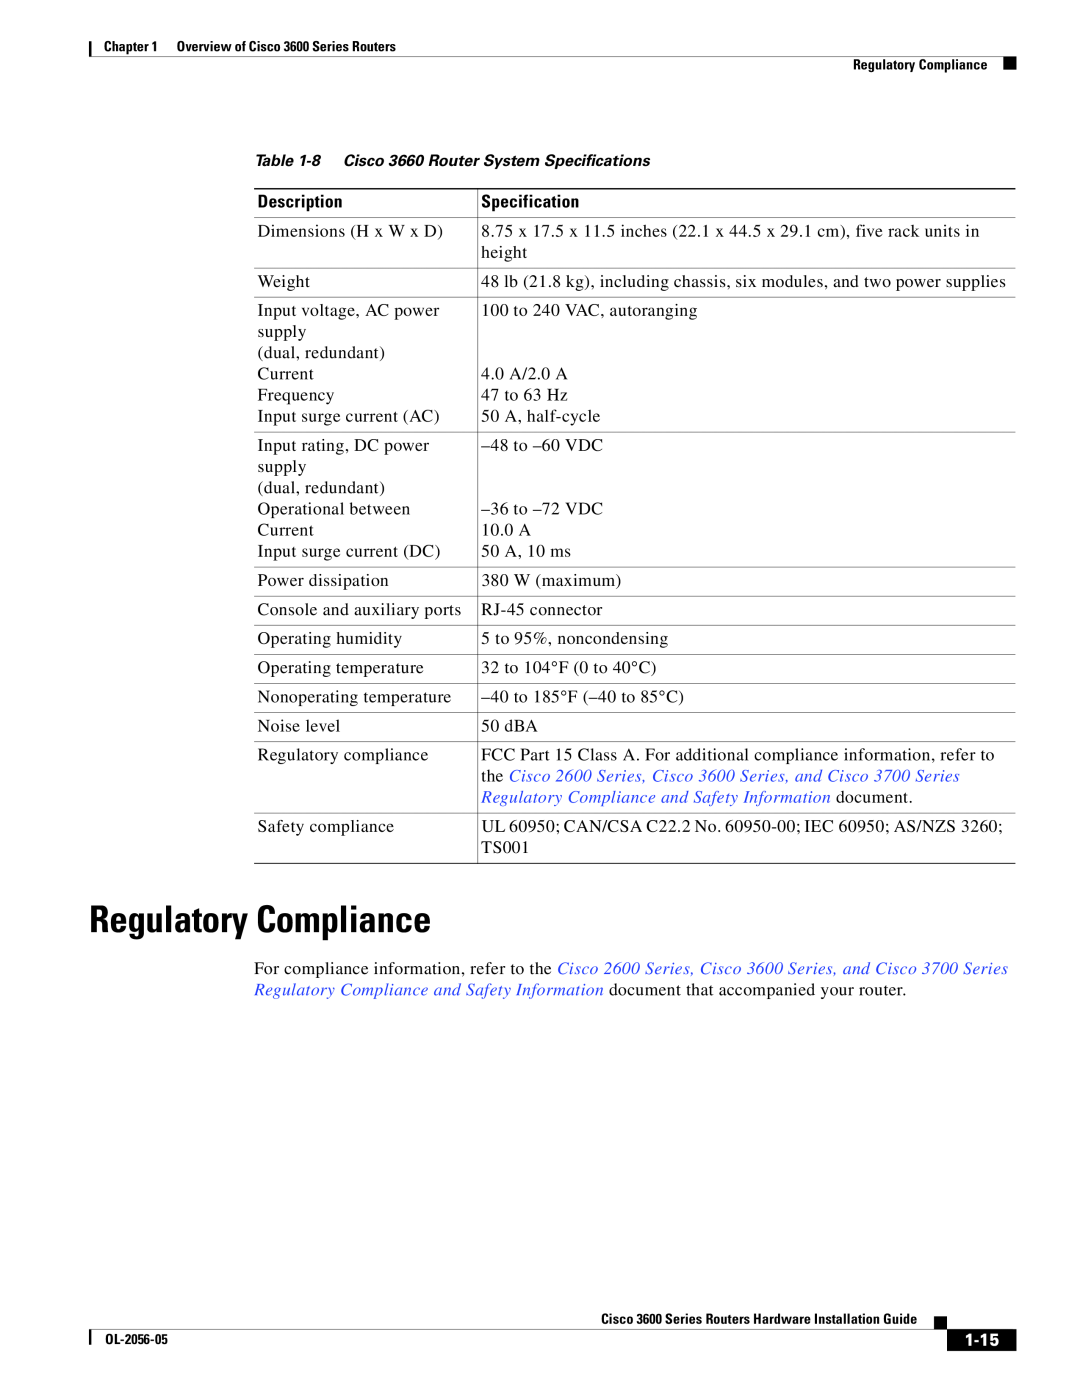 Cisco Systems 3600 Regulatory Compliance and Safety Information document, 1-15, Description, Specification 